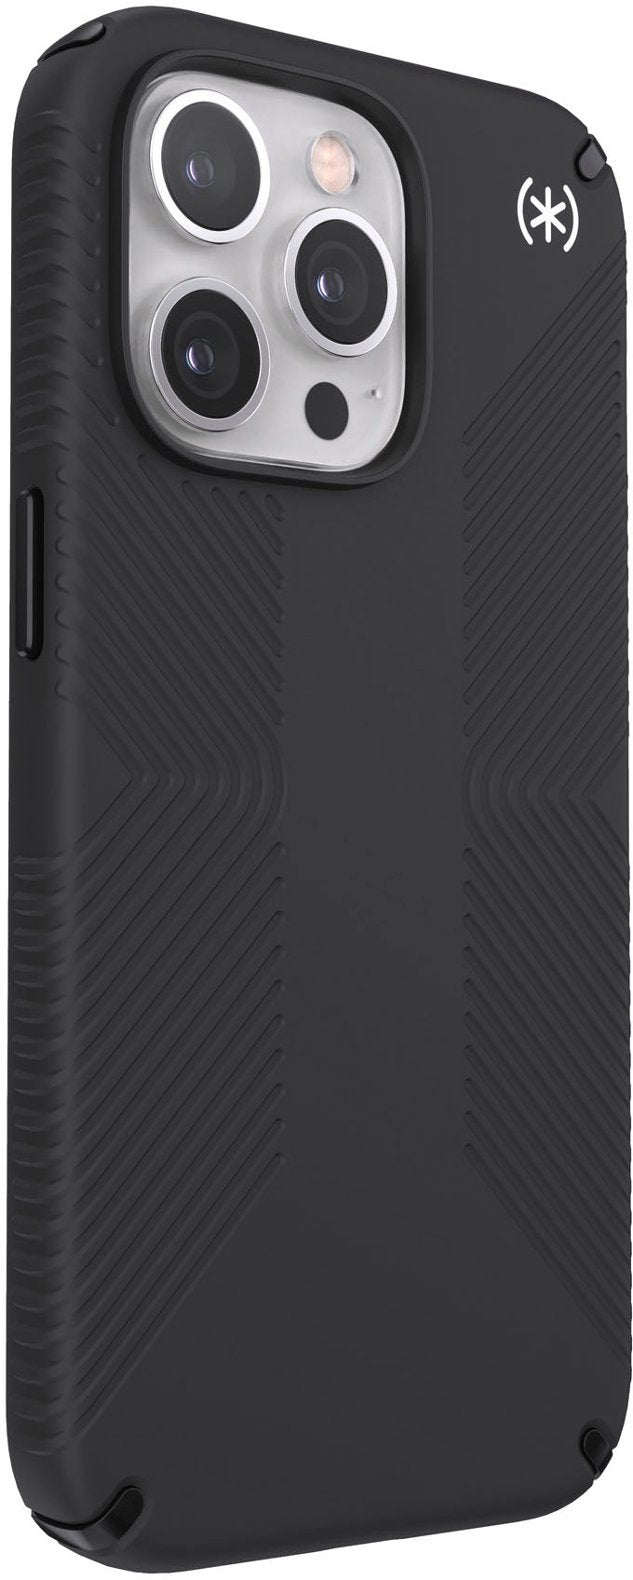 Speck - 141712-D143 Presidio2 Grip Hard Shell Case for iPhone 13 Pro - Black